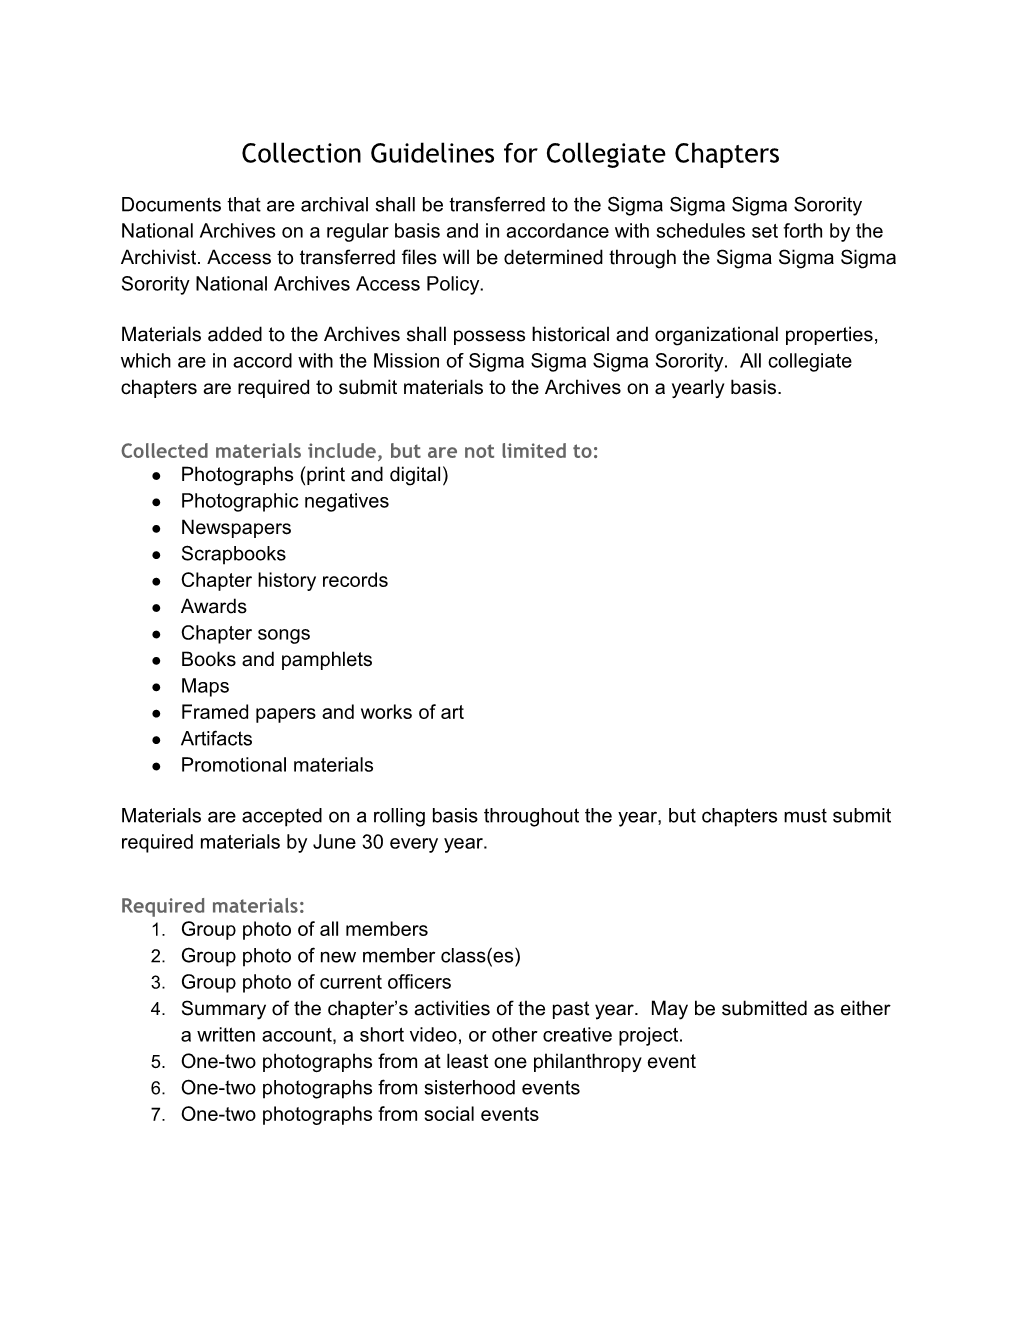 Collection Guidelines for Collegiate Chapters